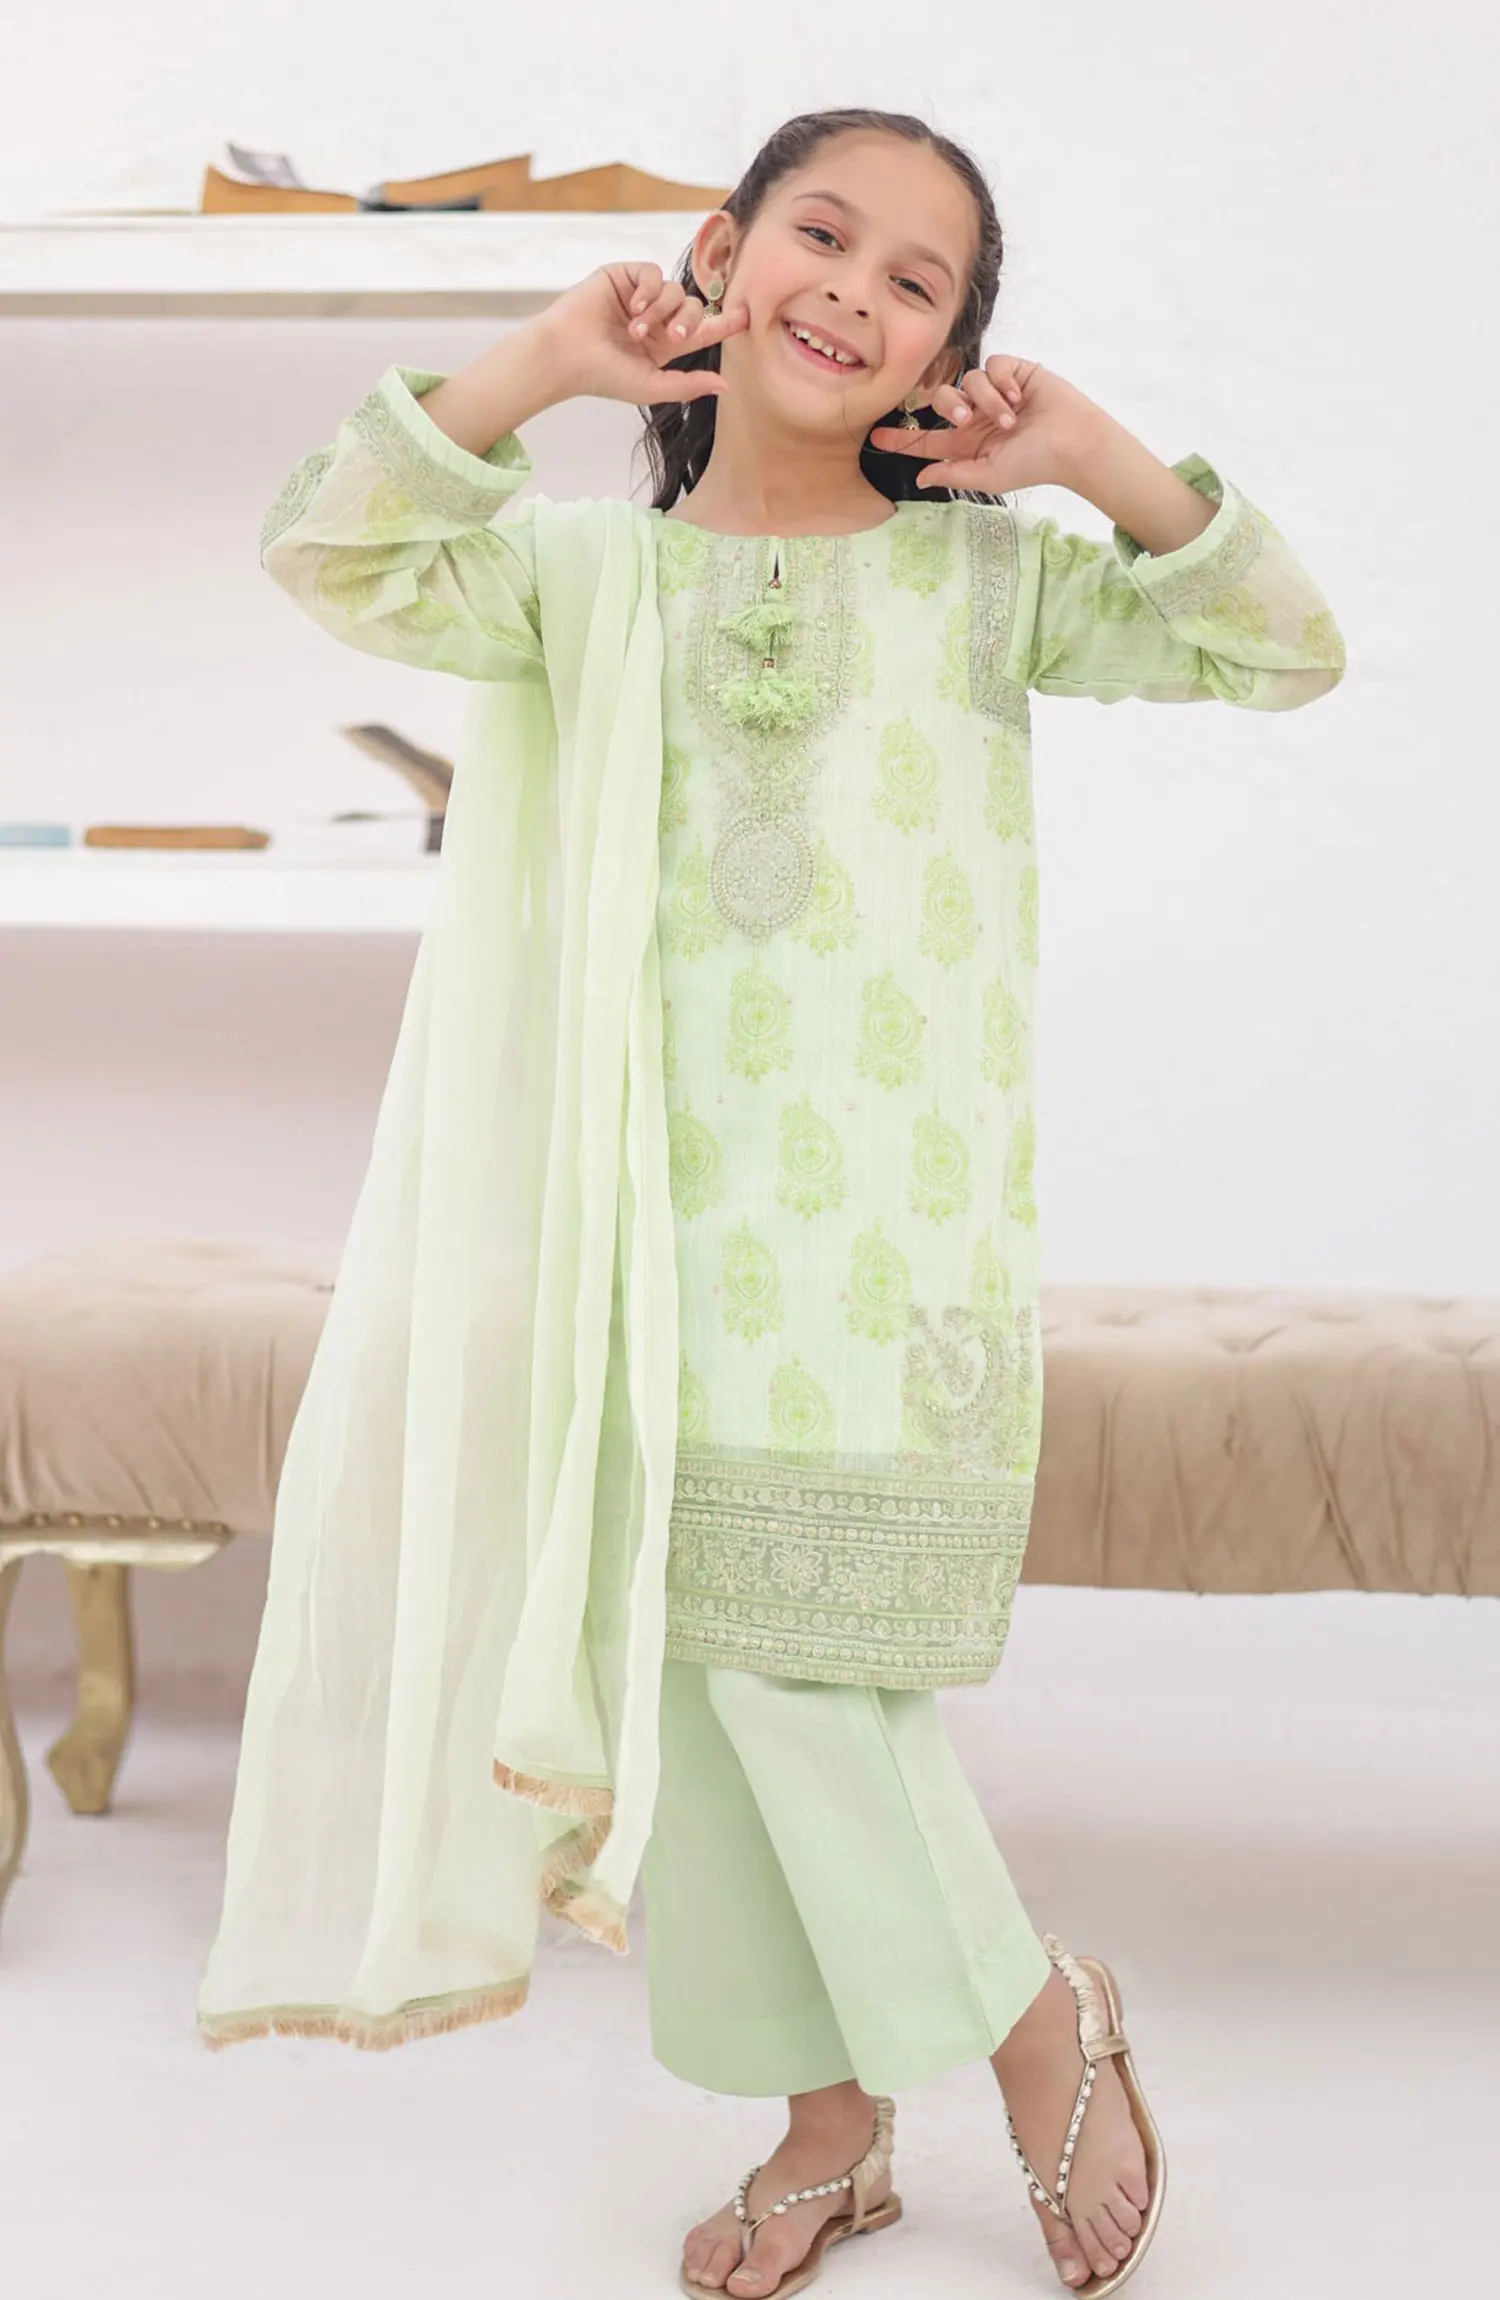 Chamak Dhamak Mother Daughter Formal Collection - HS 150 K (Green)